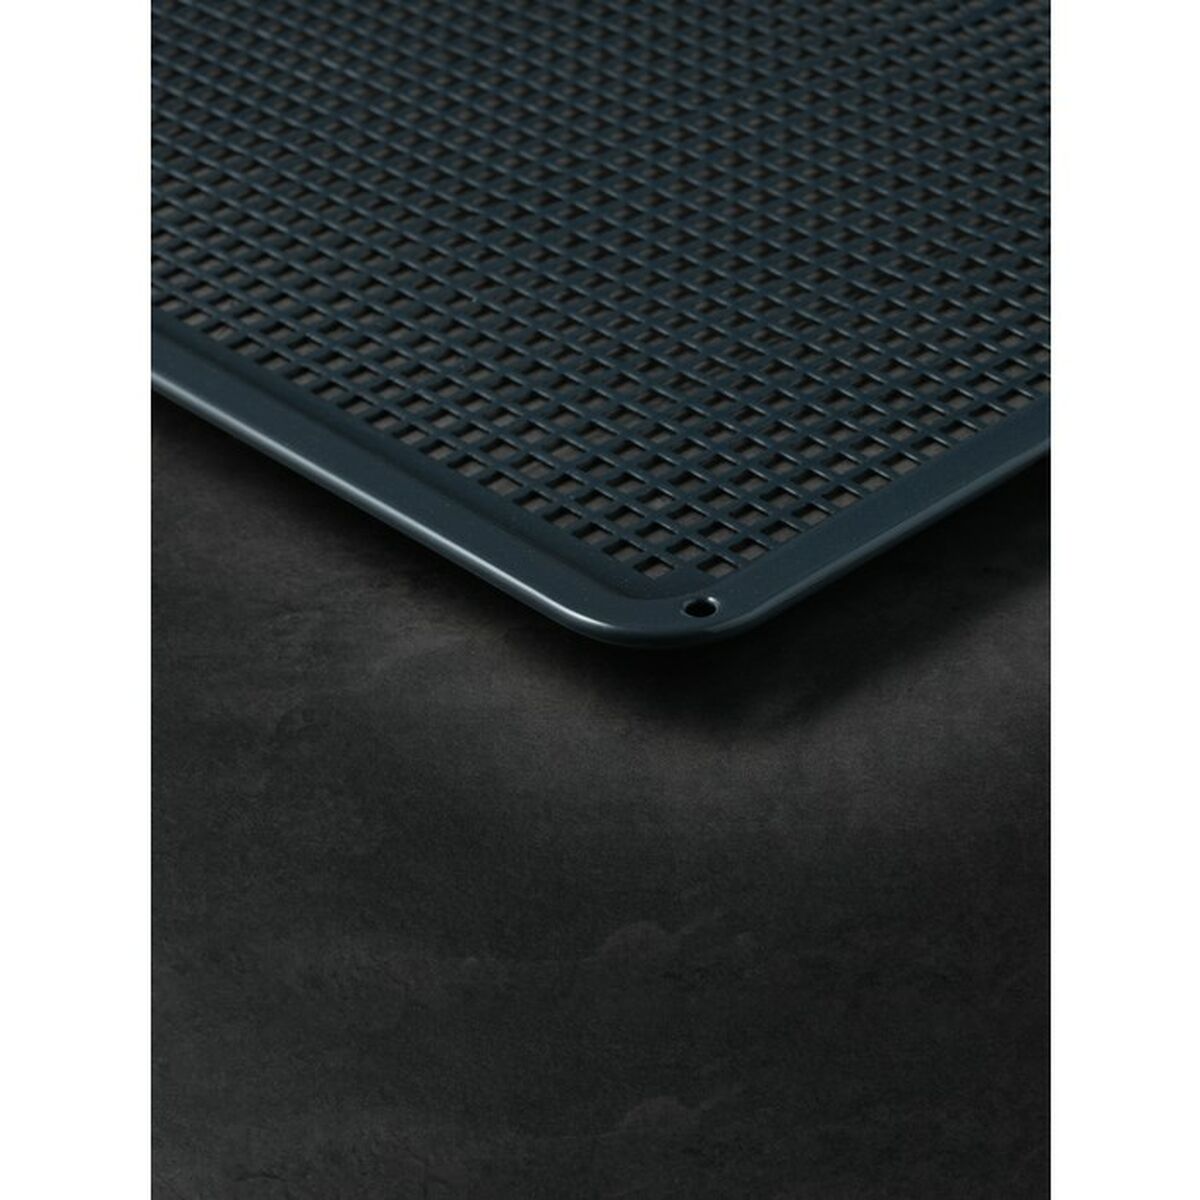 Baking tray AEG A9OOAF00 Black 45 x 2,5 x 38,5 cm Stainless steel (1 Piece)